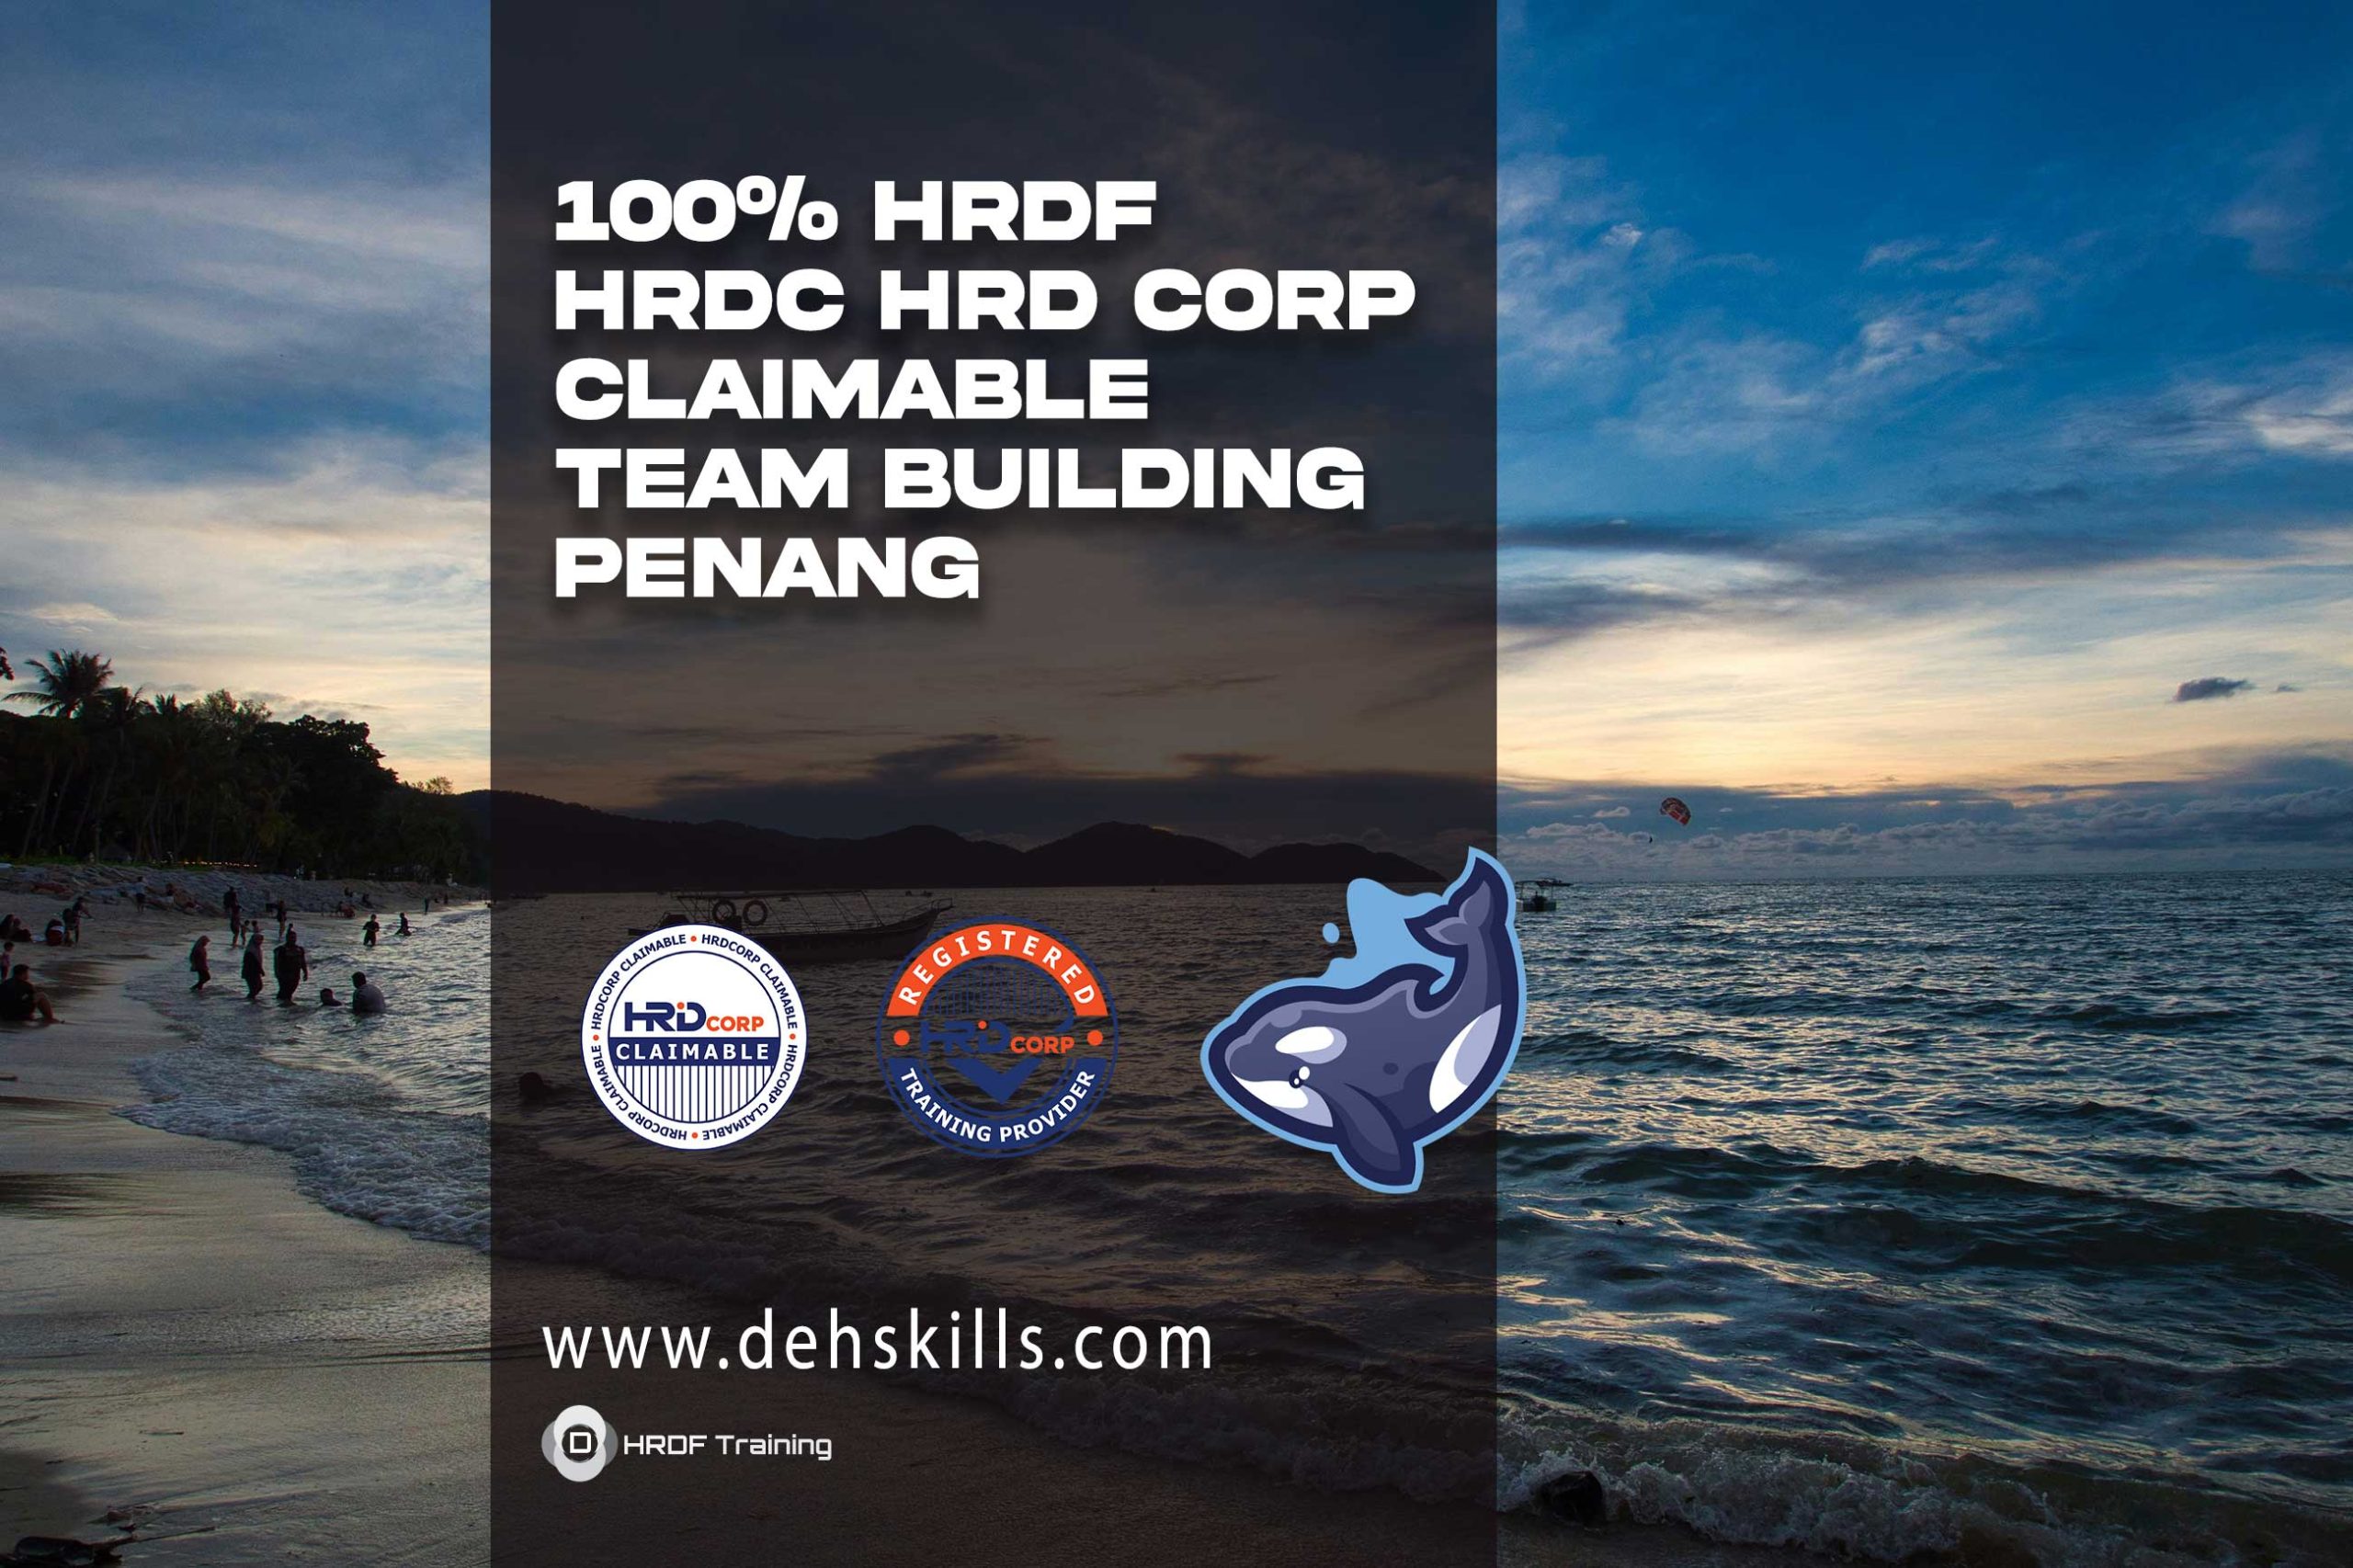 HRDF-HRDC-HRD-Corp-Claimable-Team-Building-Penang